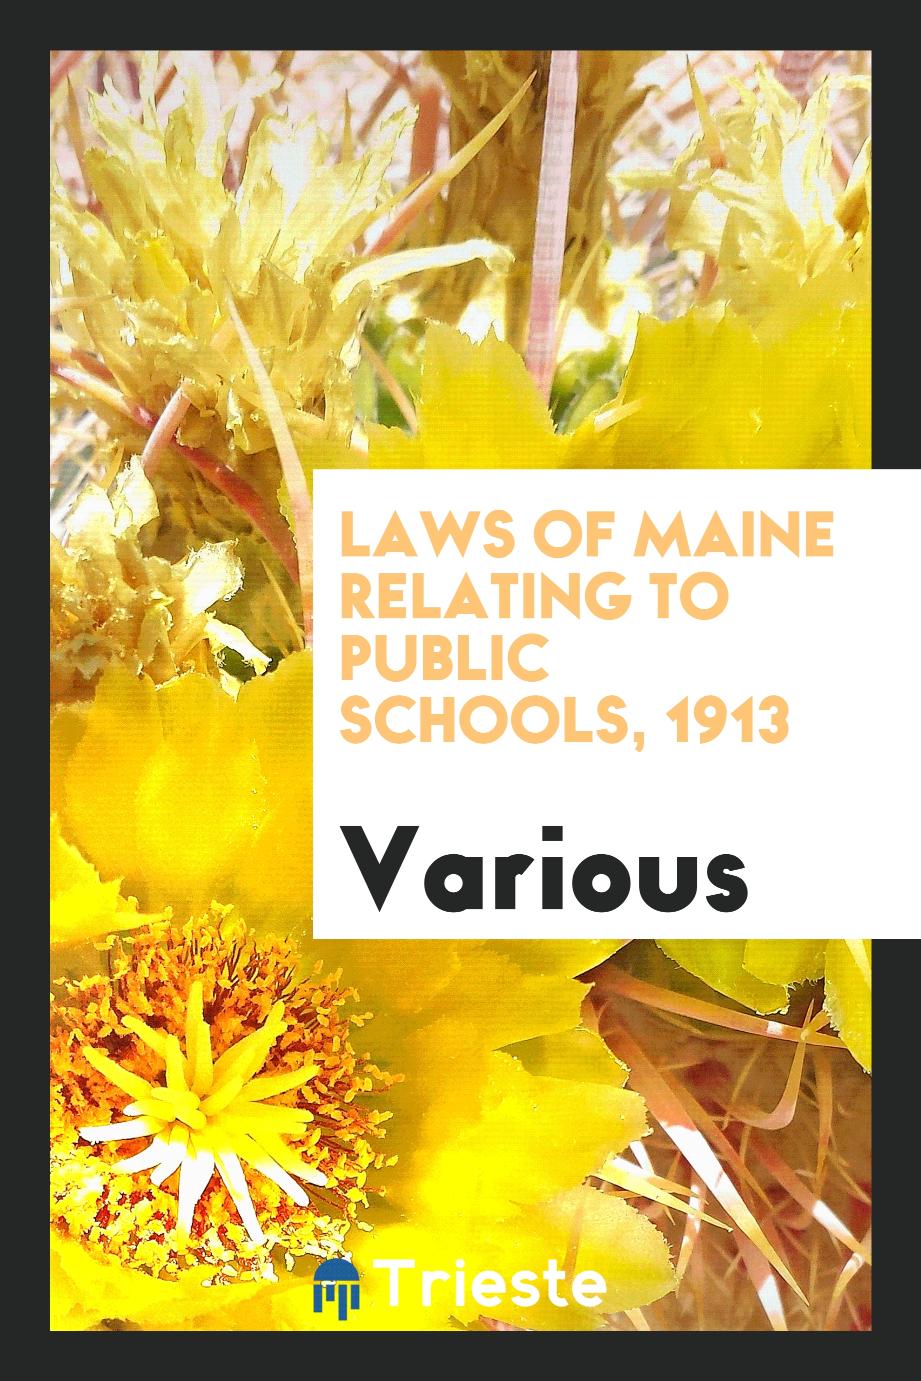 Laws of Maine Relating to Public Schools, 1913